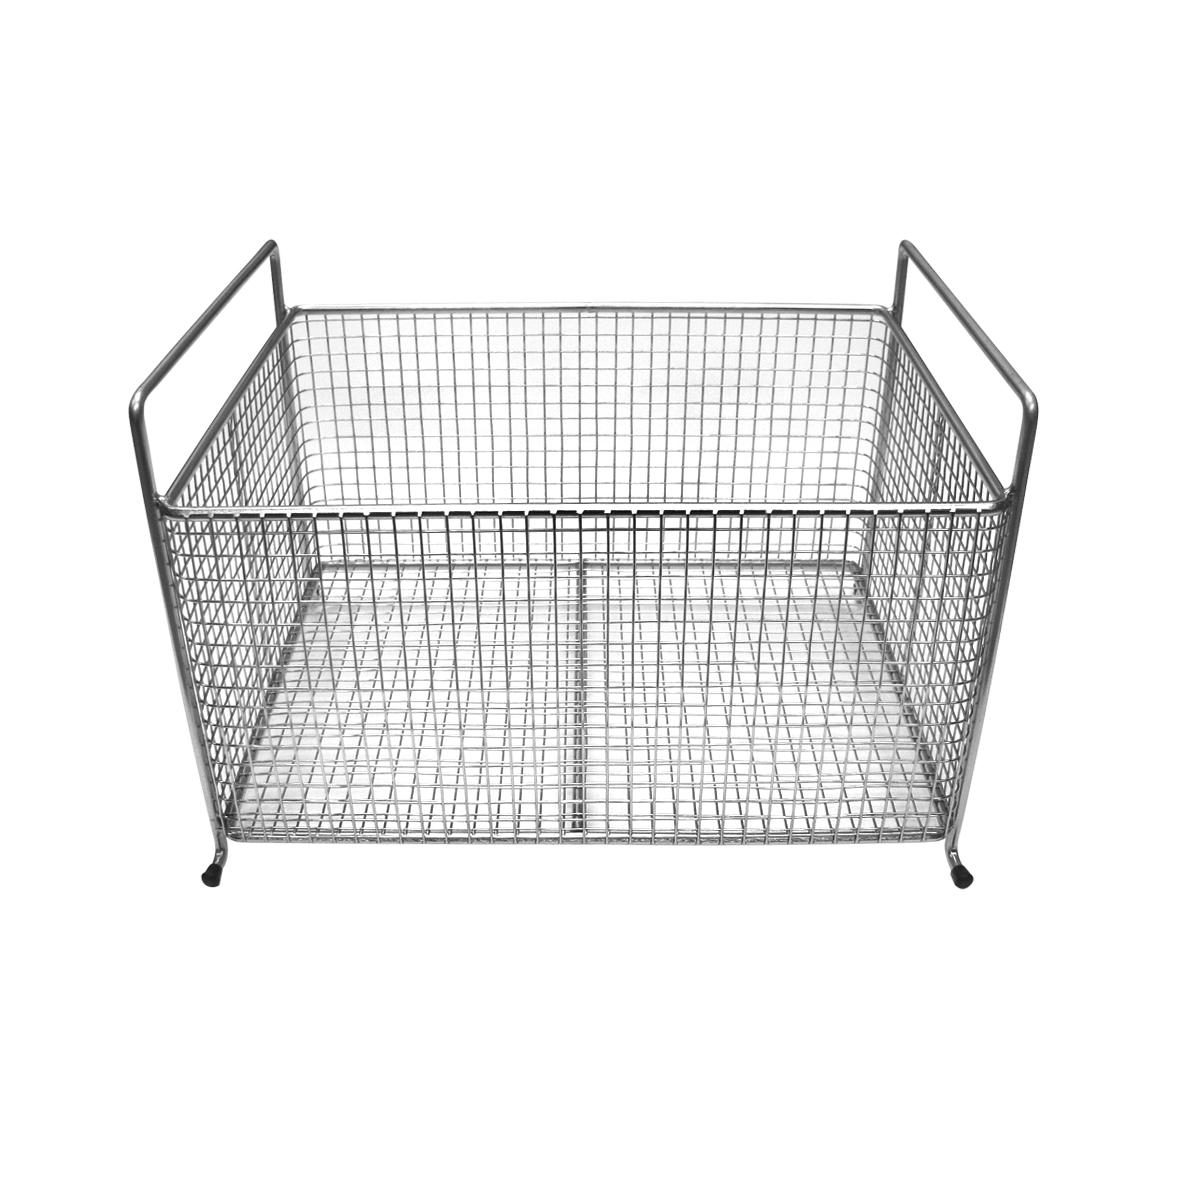 Standing basket, stainless steel, for Elma X-Tra 50